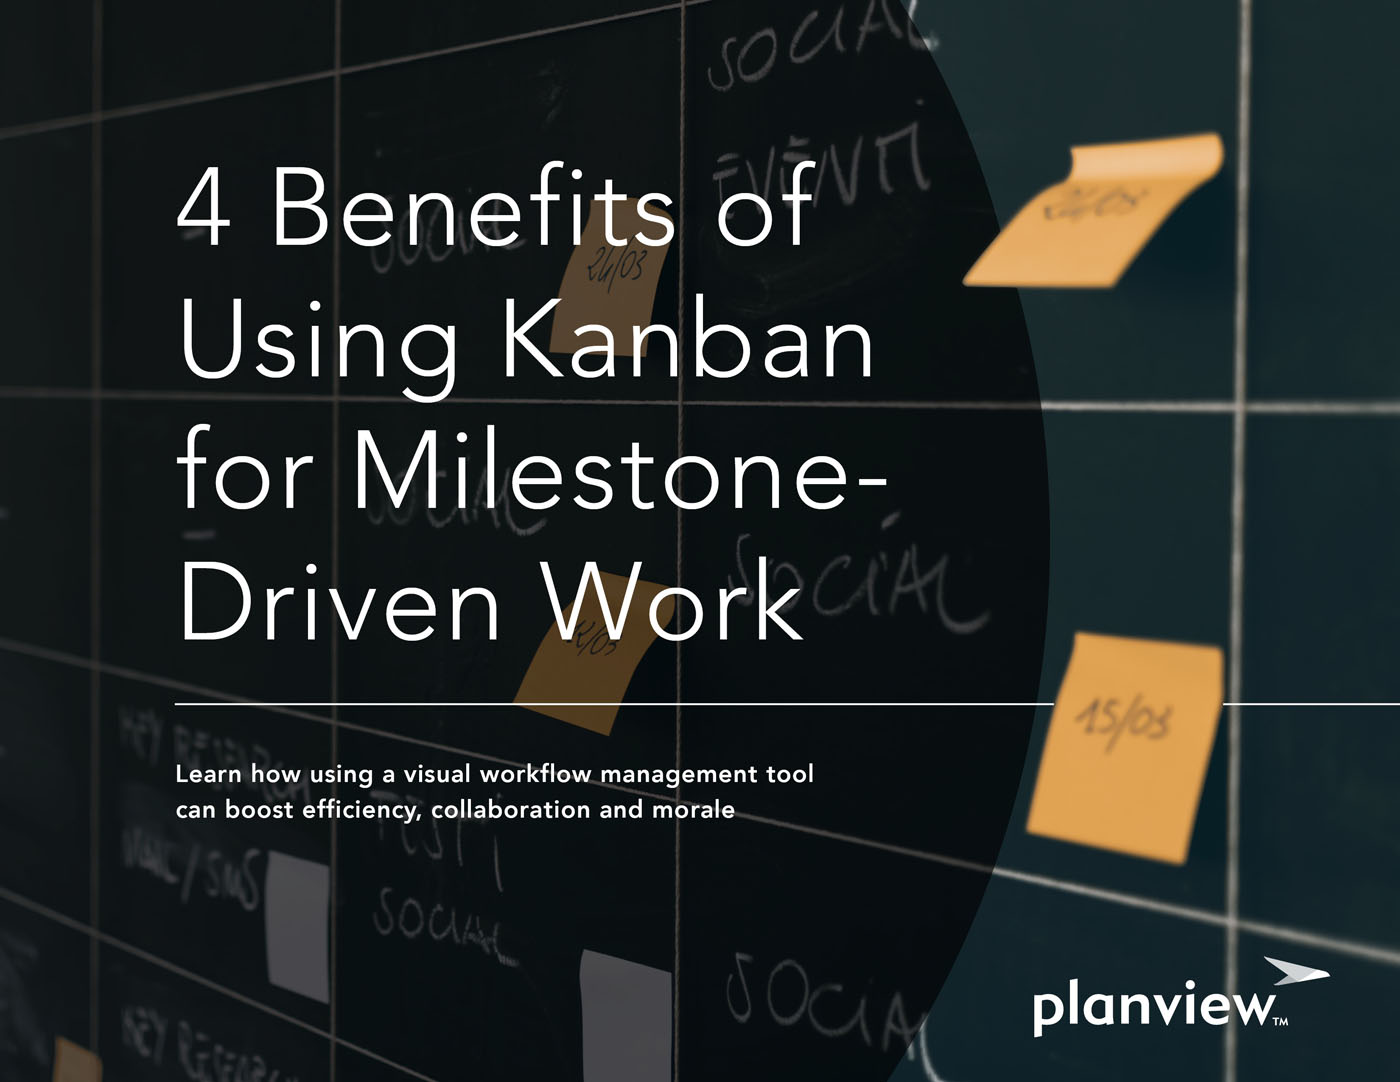 Four Benefits of Using Kanban for Milestone Driven Work